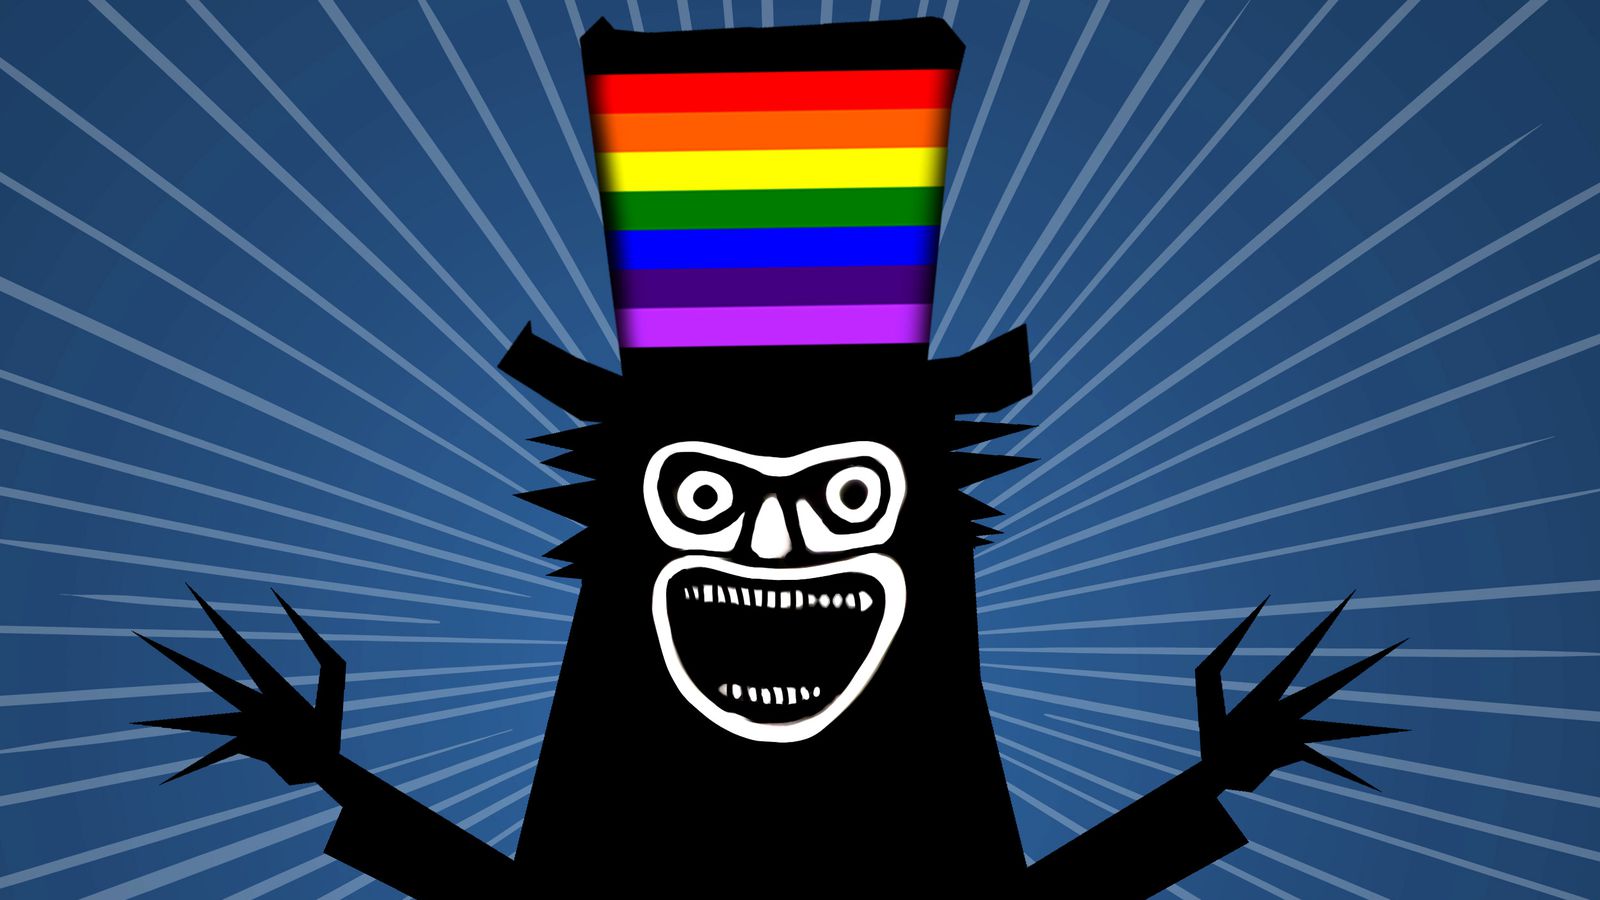 How the Babadook became the LGBTQ icon we didn't know we needed - Vox